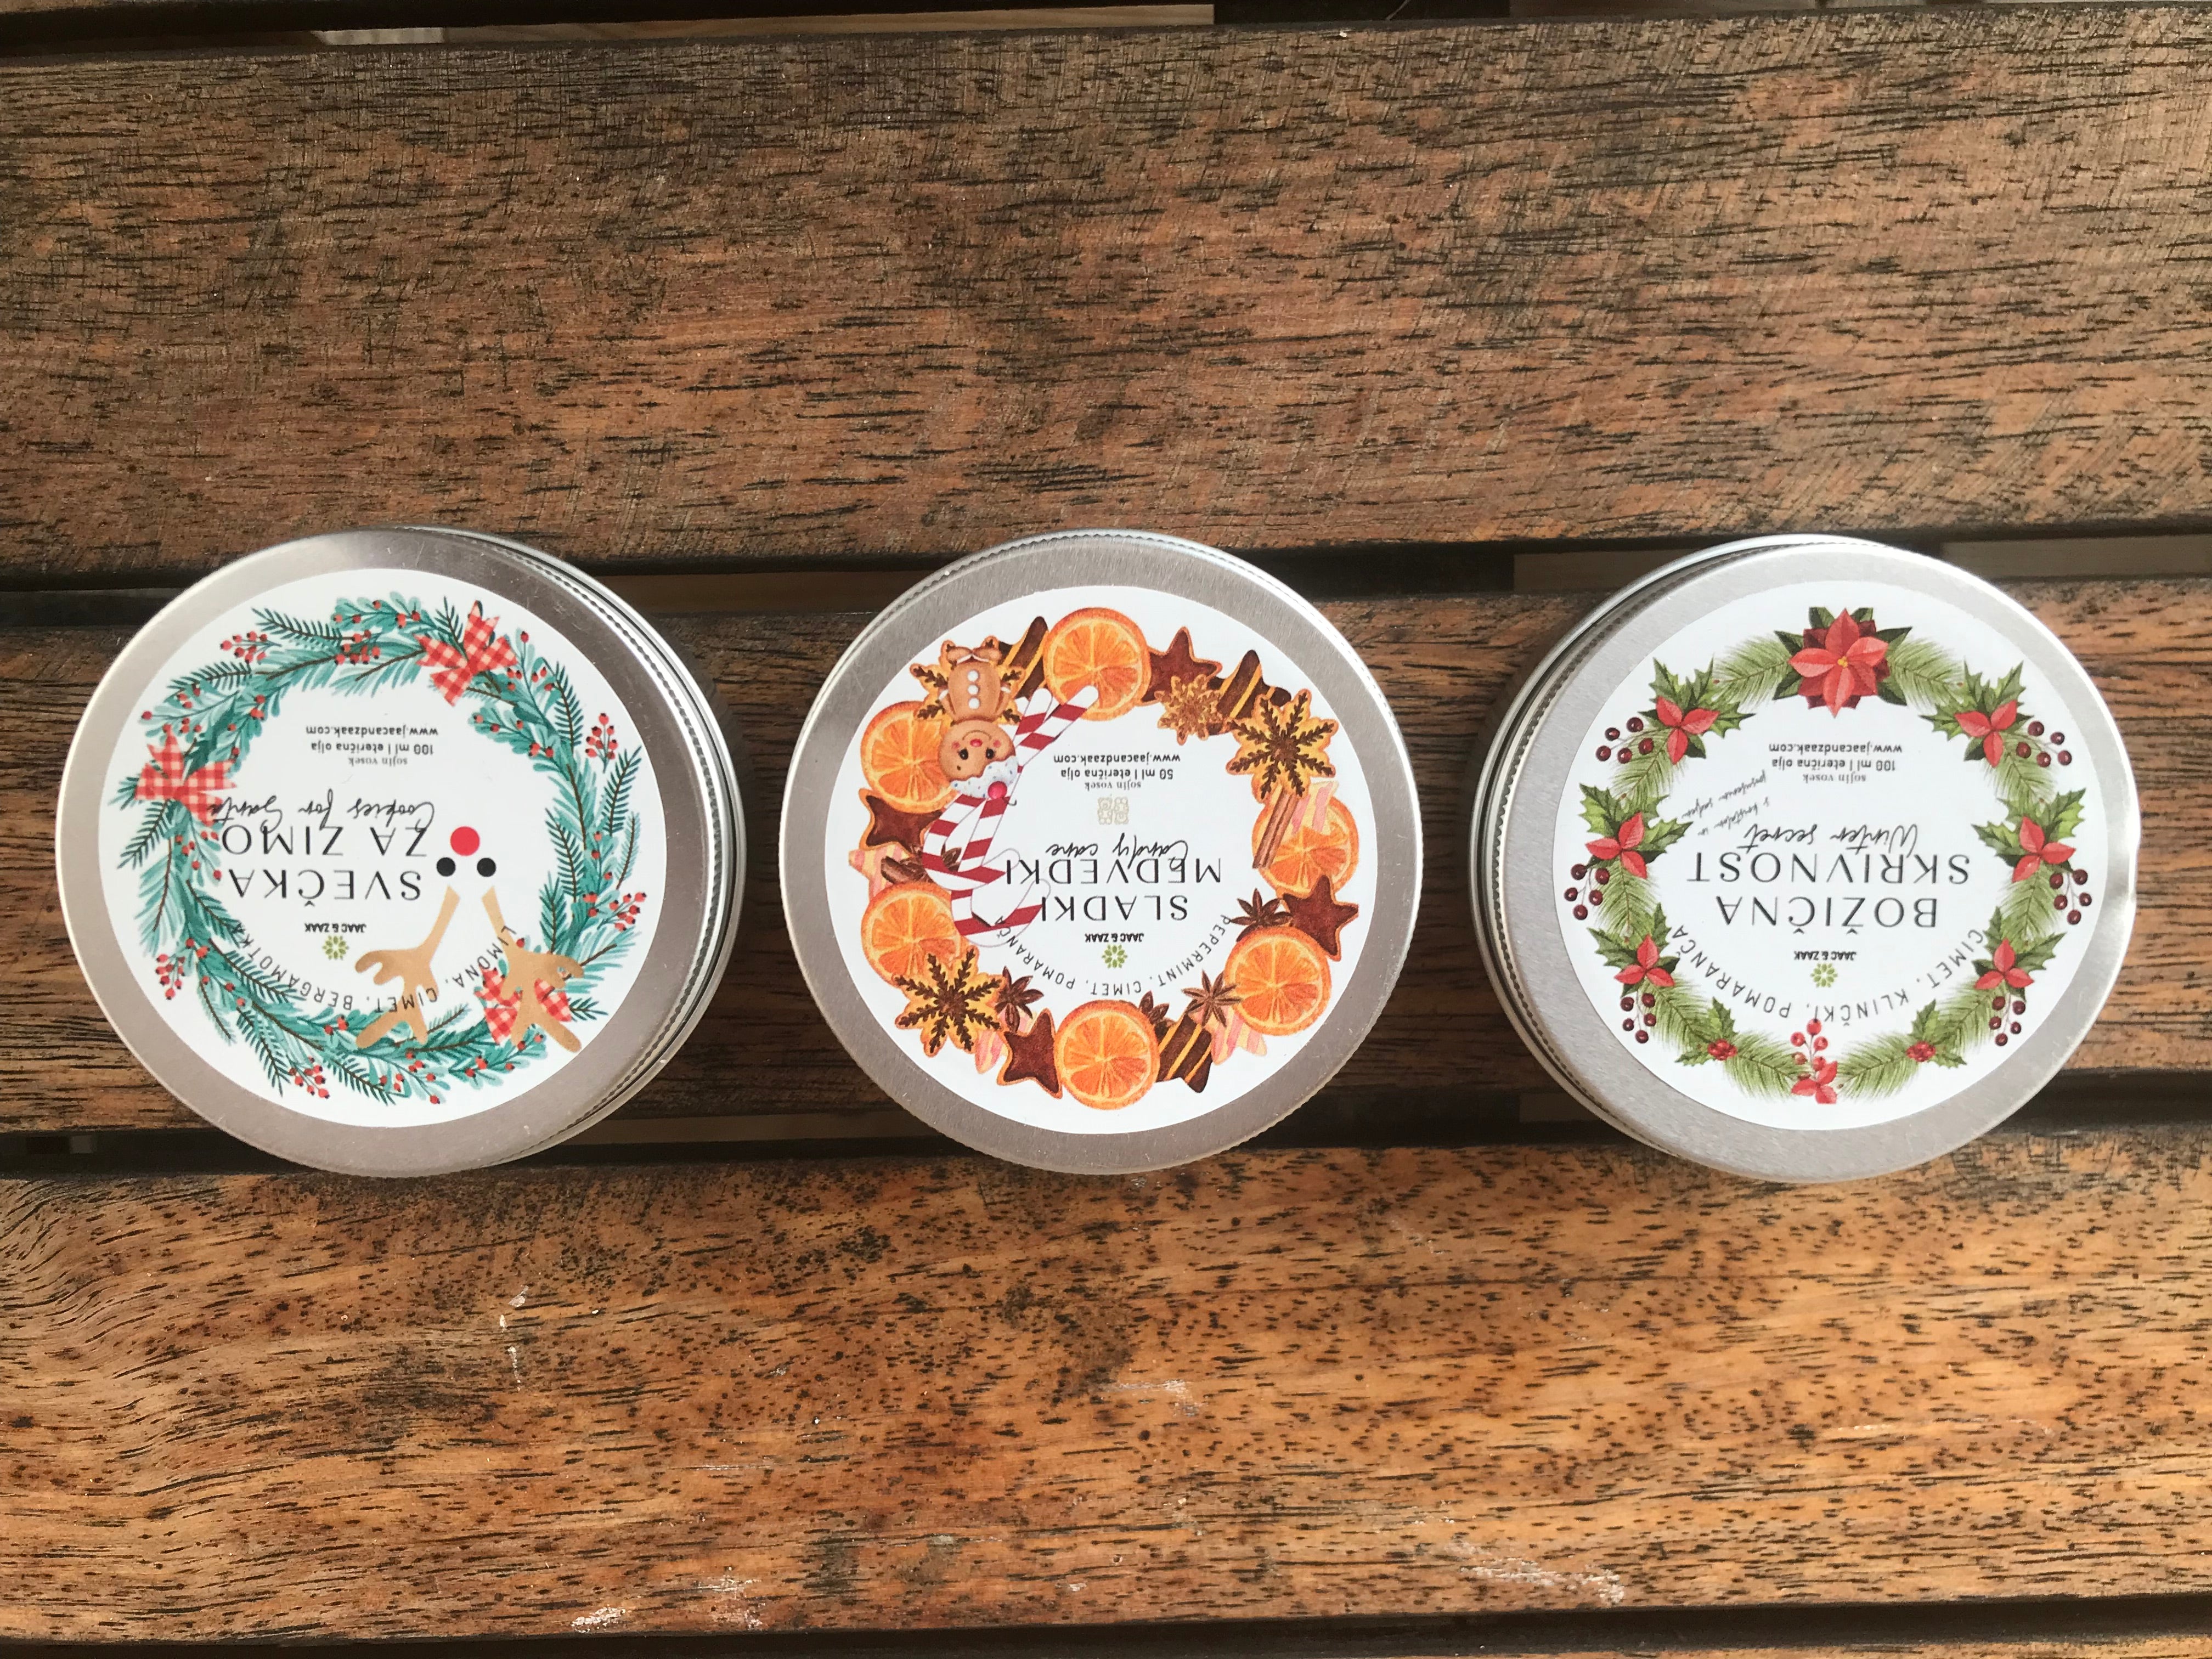 HOLIDAY BOND - 2XCANDLE & WAX MELTS (limited edition) IN BOX!